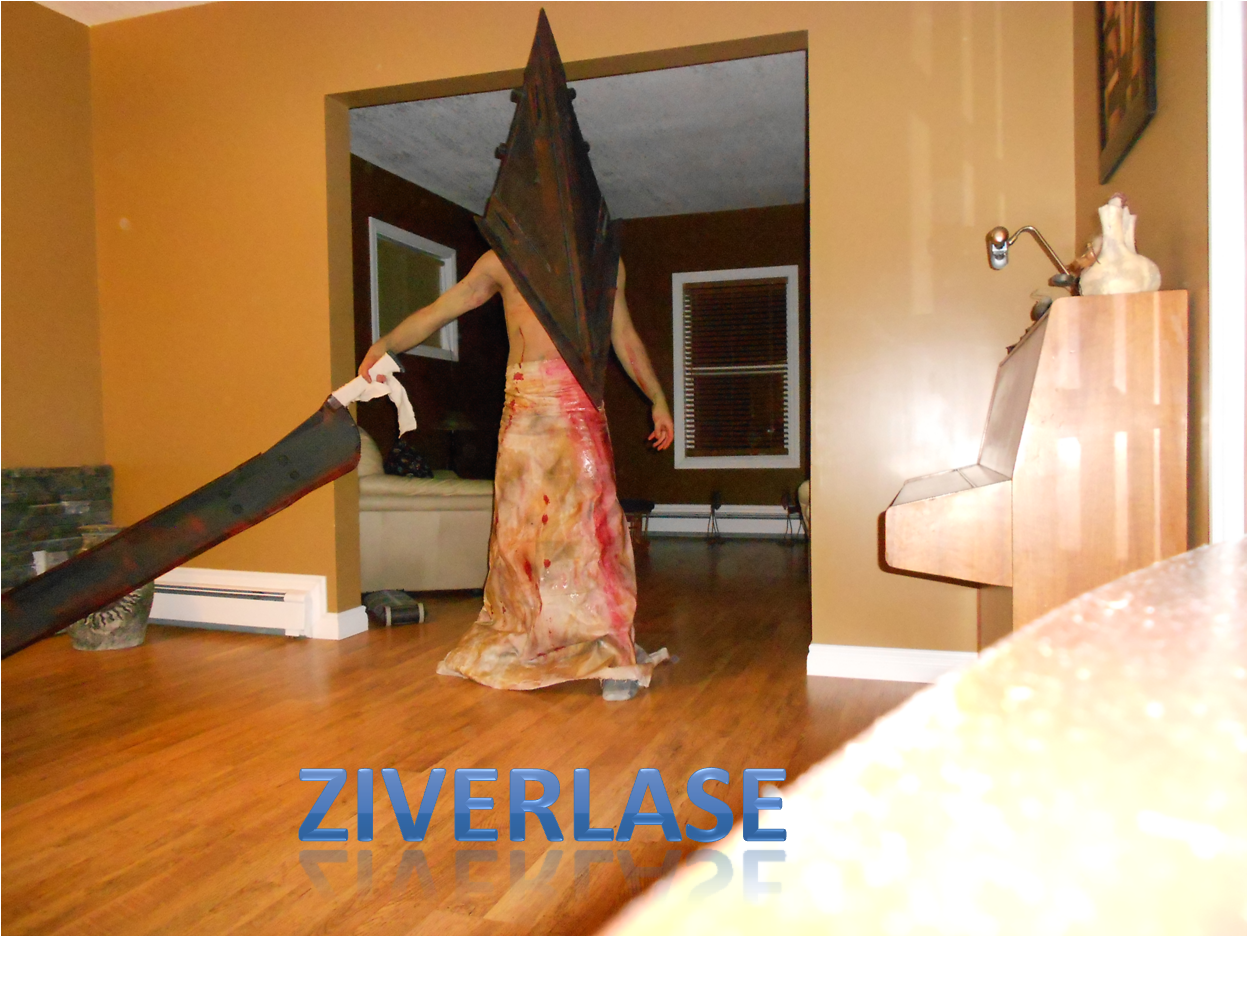 Home made Pyramid head costume from silent hill.
